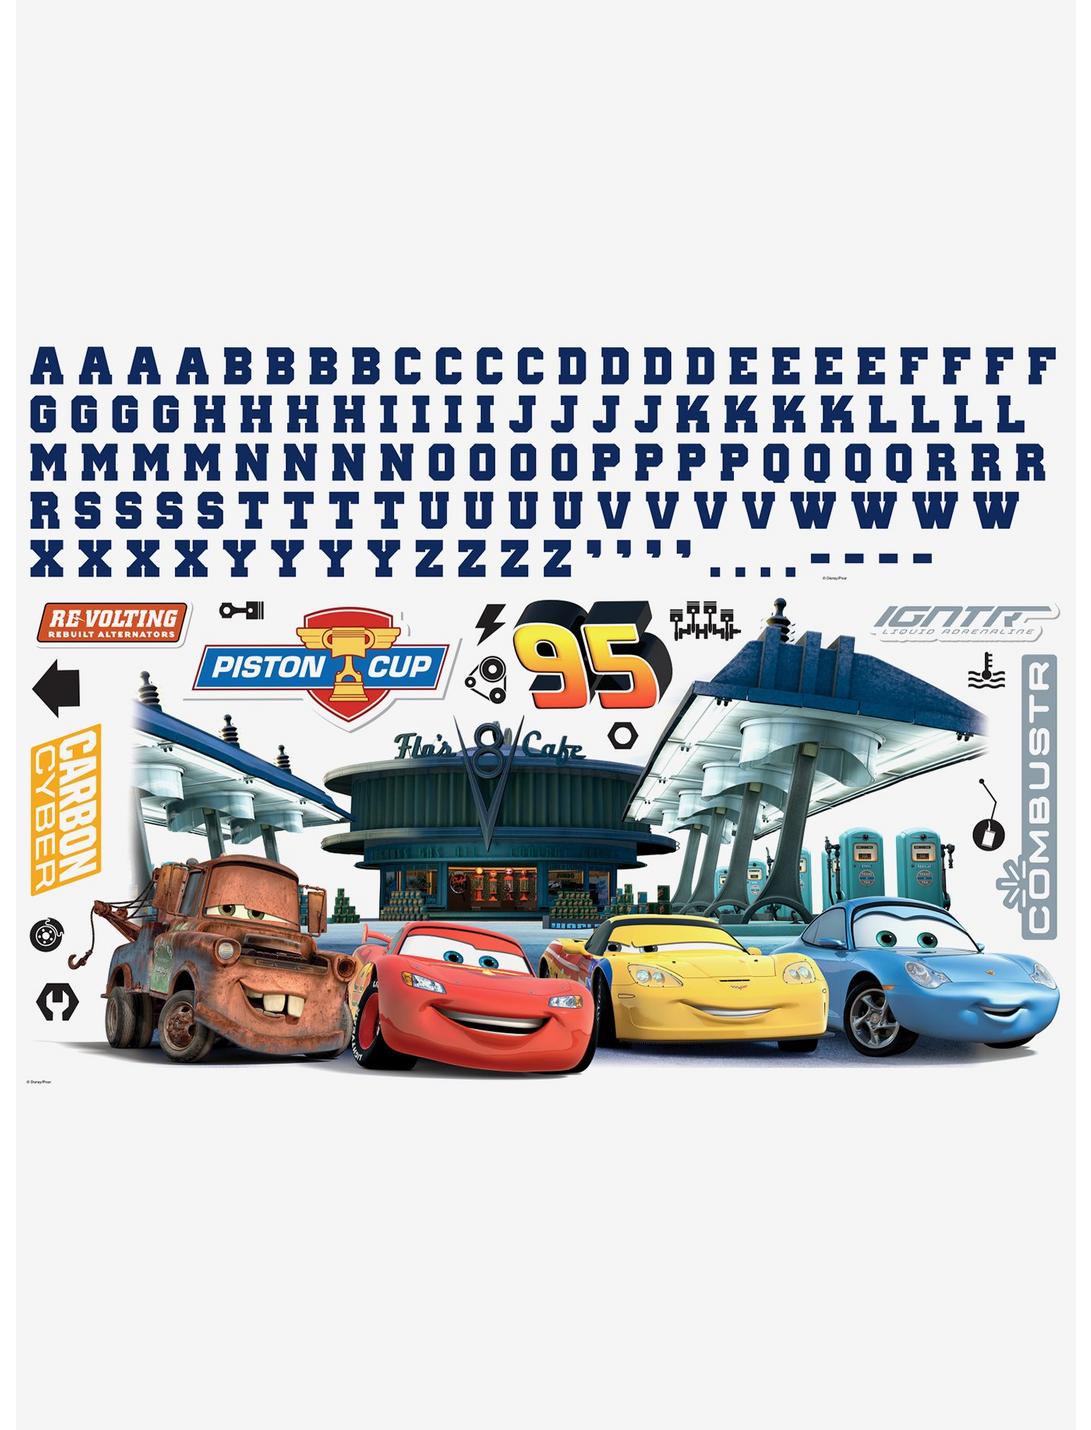 Disney Pixar Cars Peel And Stick Giant Wall Decals With Alphabet, , hi-res